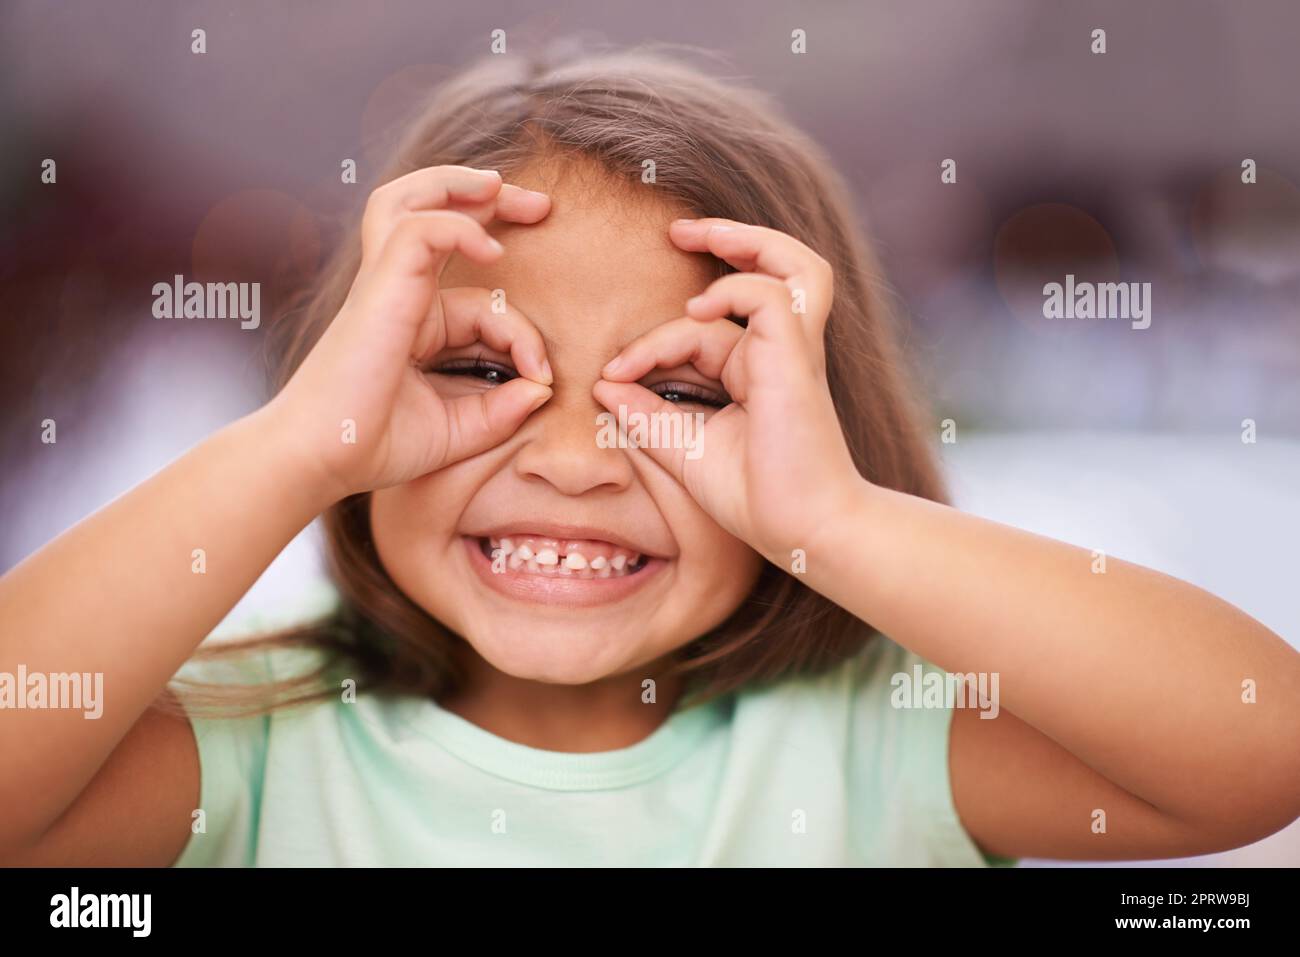 Little girls with dreams become women with vision. a playful little girl with pulling a funny face. Stock Photo